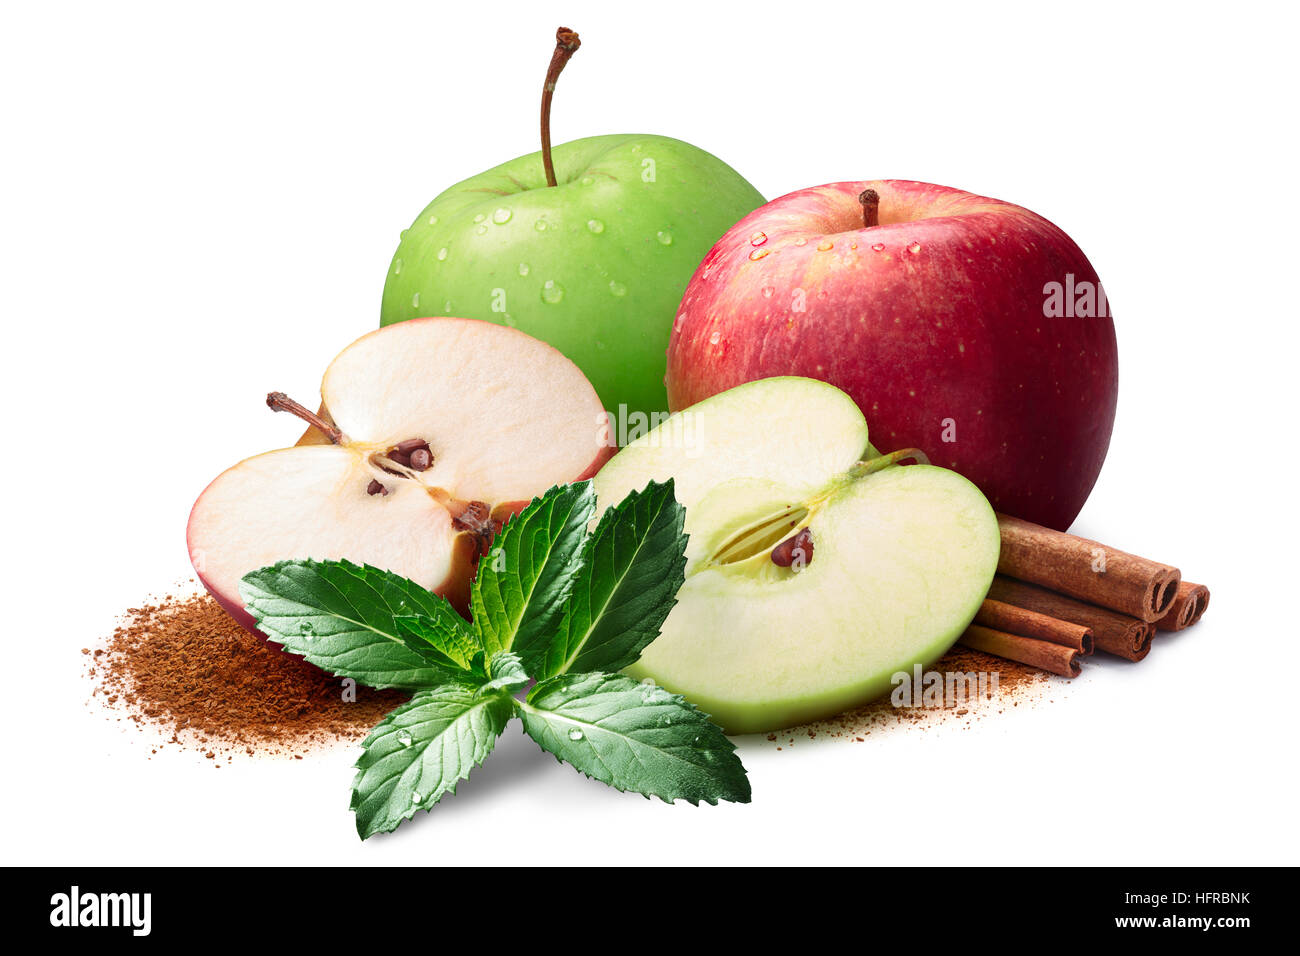 Mint, whole and halved red and green apples next to piles of cinnamon, in sticks and ground. Clipping paths, shadow separated Stock Photo